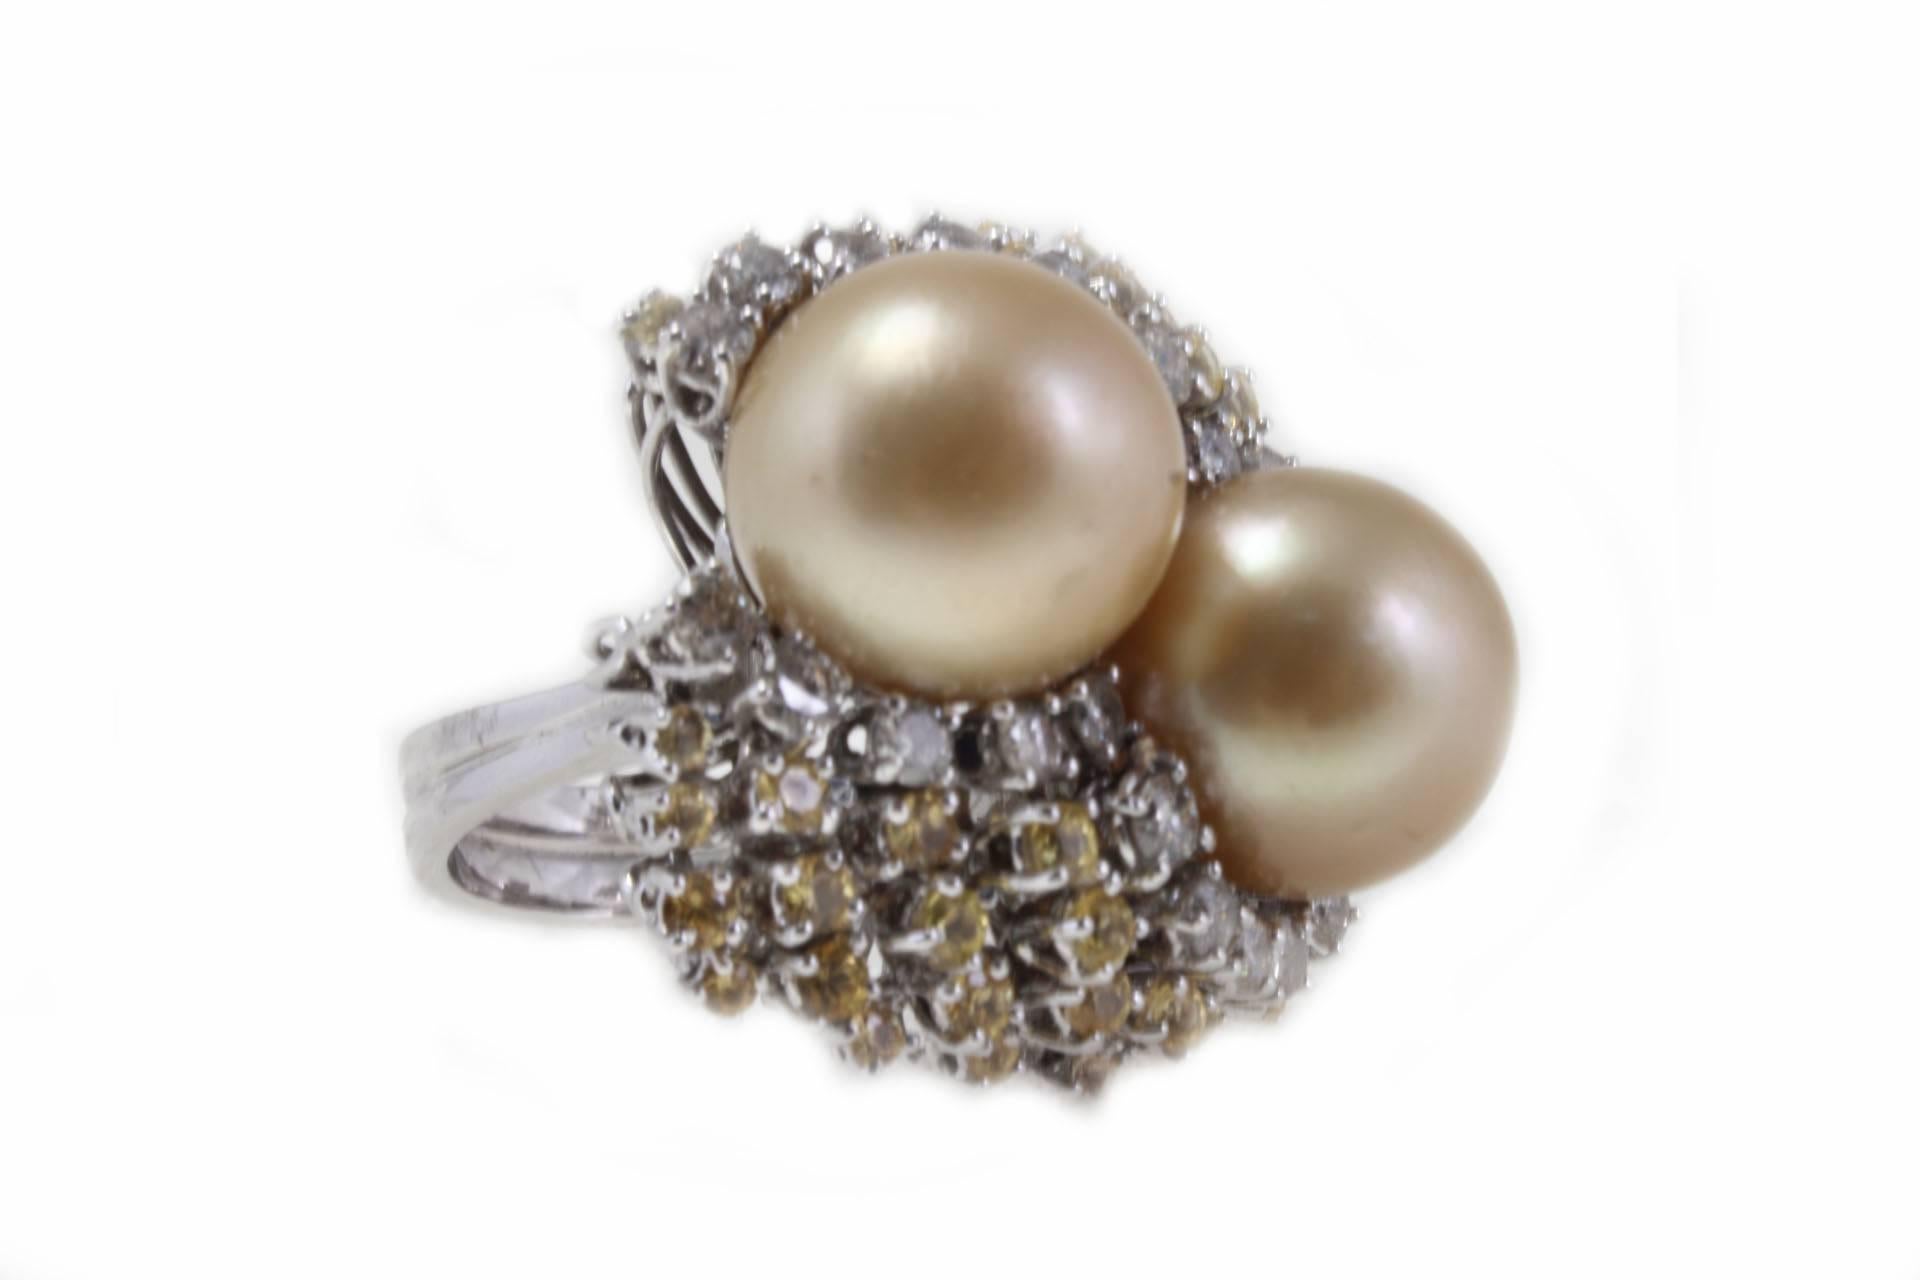 Sparkling cluster ring composed of 2 medium size Australian gold pearls, surrounded of diamonds and yellow sapphires. All is mounted in 18K white gold.
Ring Size ITA 16 - French 56 - US 7.5 - UK P
Tot weight 20.6 g
Diamonds 1.29 ct
Yellow sapphiers